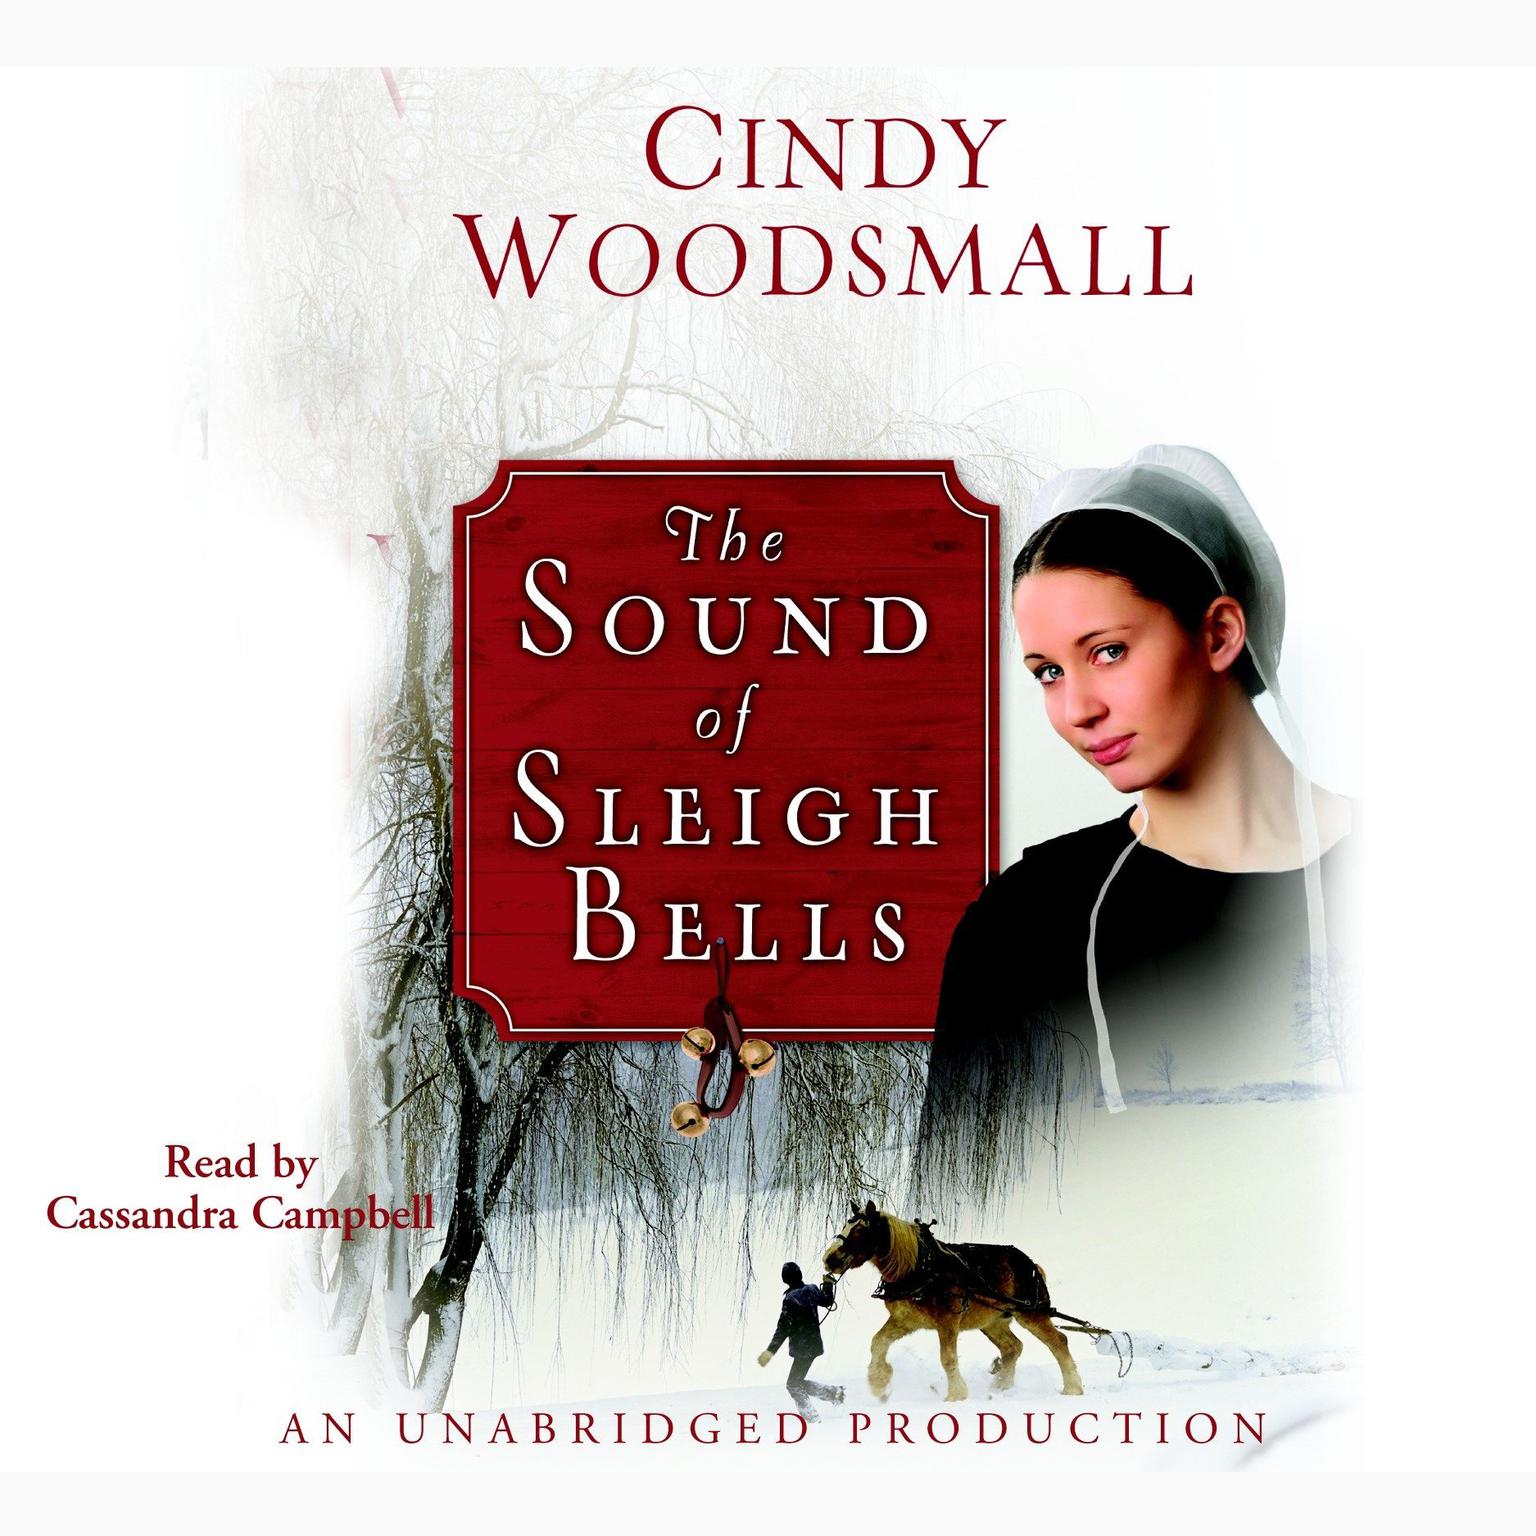 The Sound of Sleigh Bells: A Romance from the Heart of Amish Country Audiobook, by Cindy Woodsmall